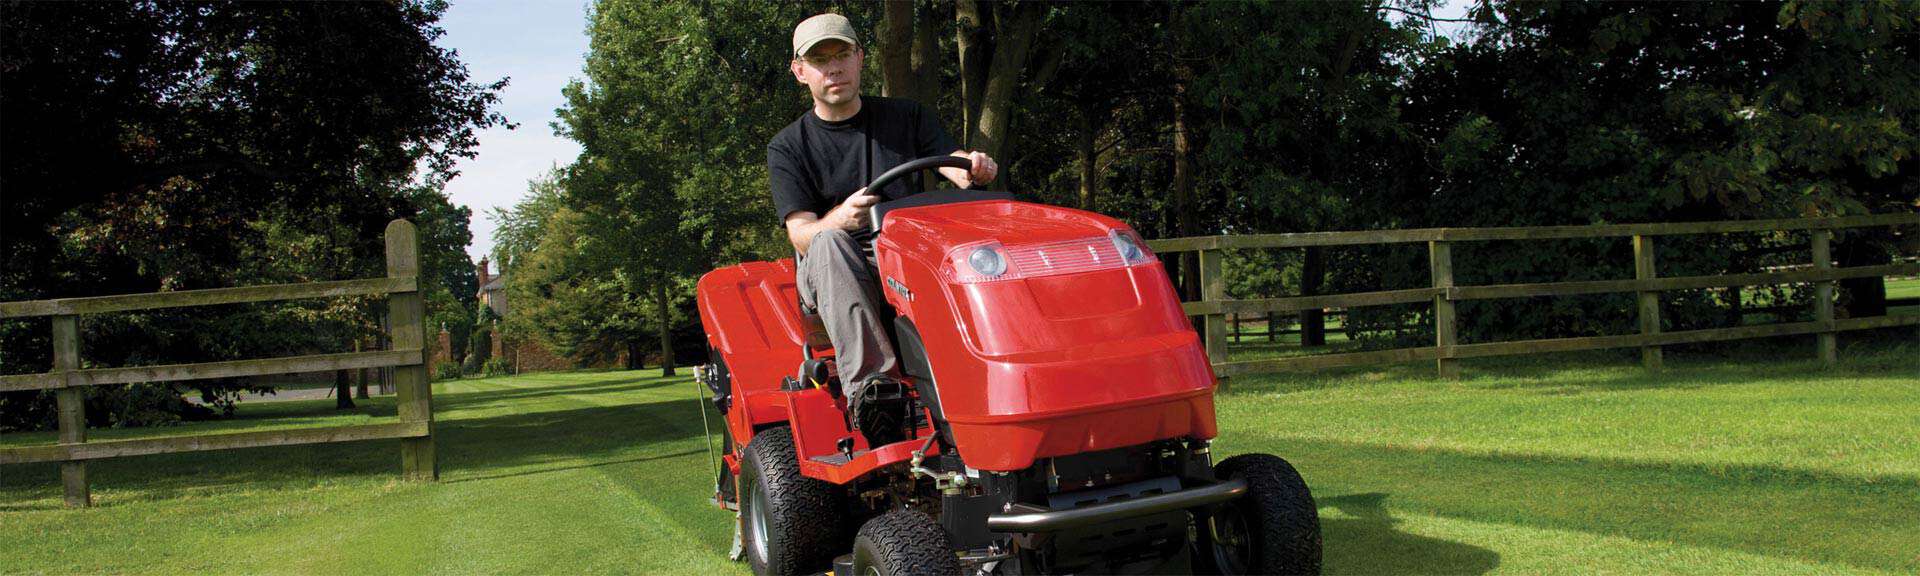 Man on a red lawnmower